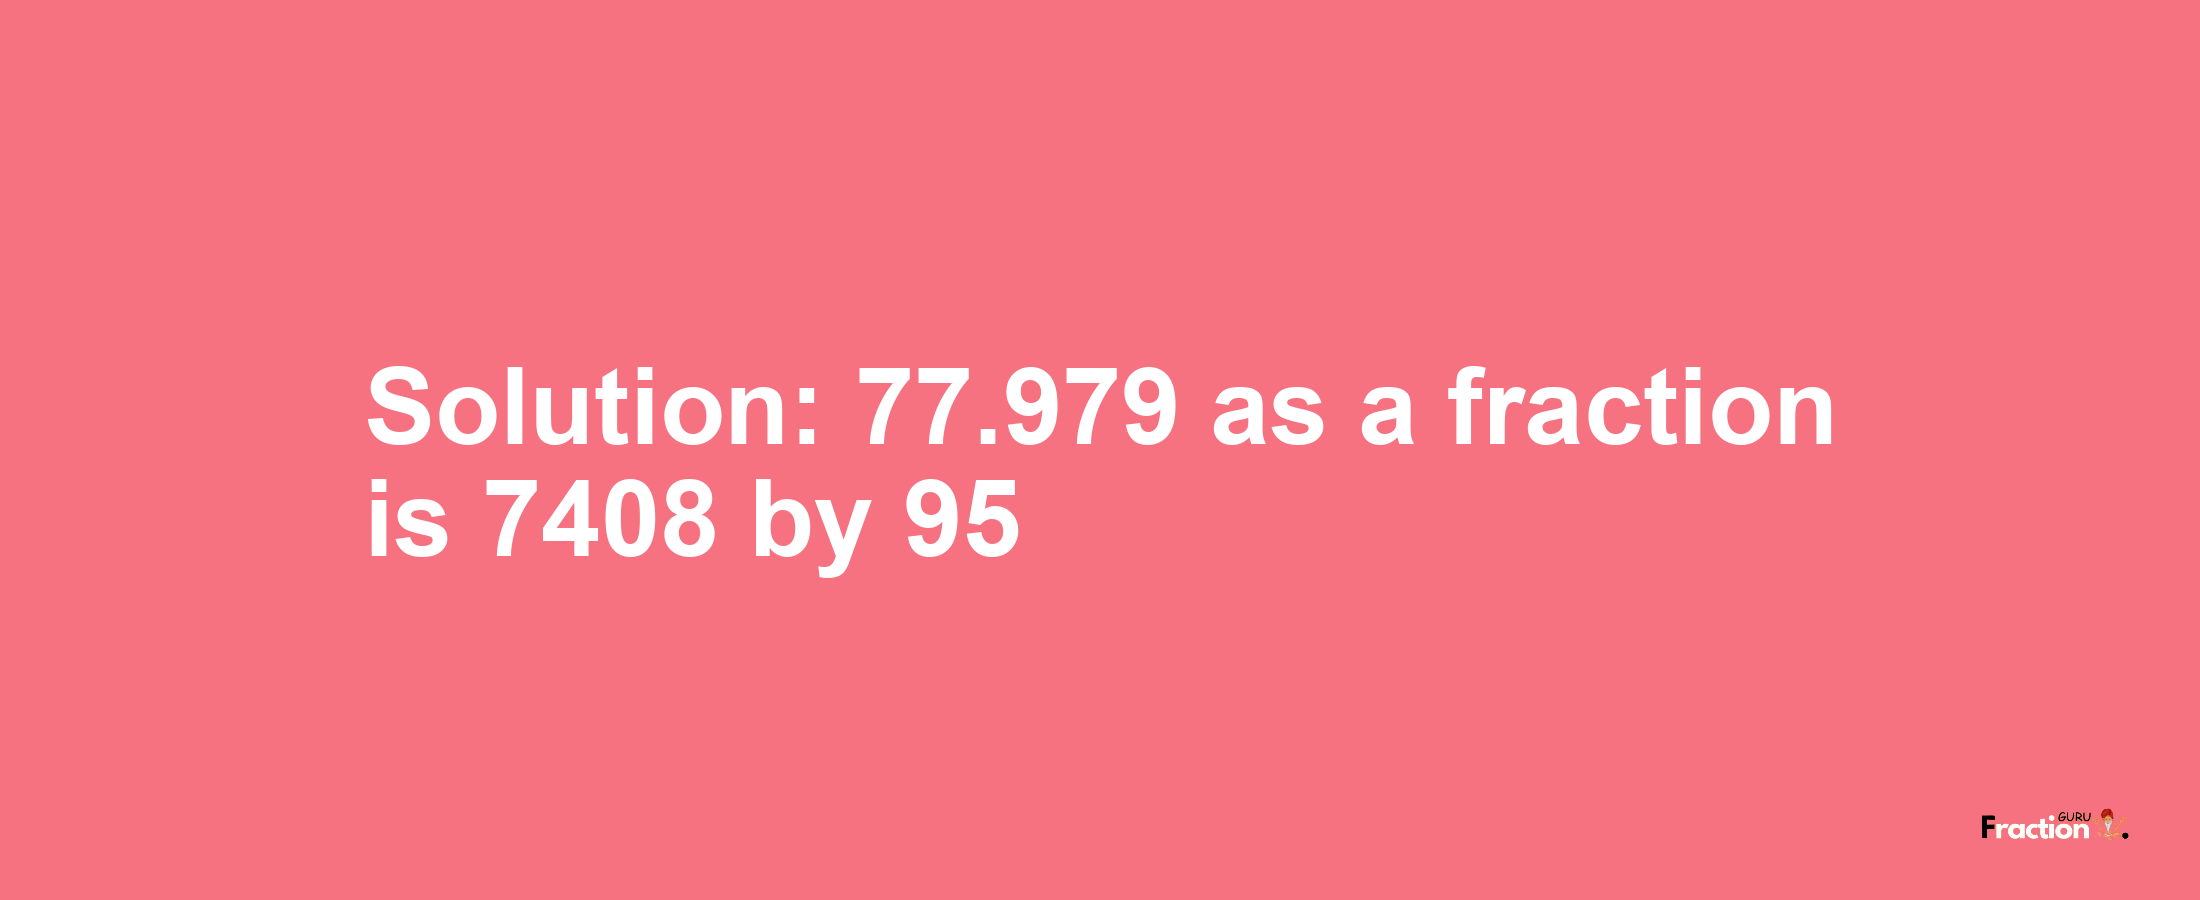 Solution:77.979 as a fraction is 7408/95